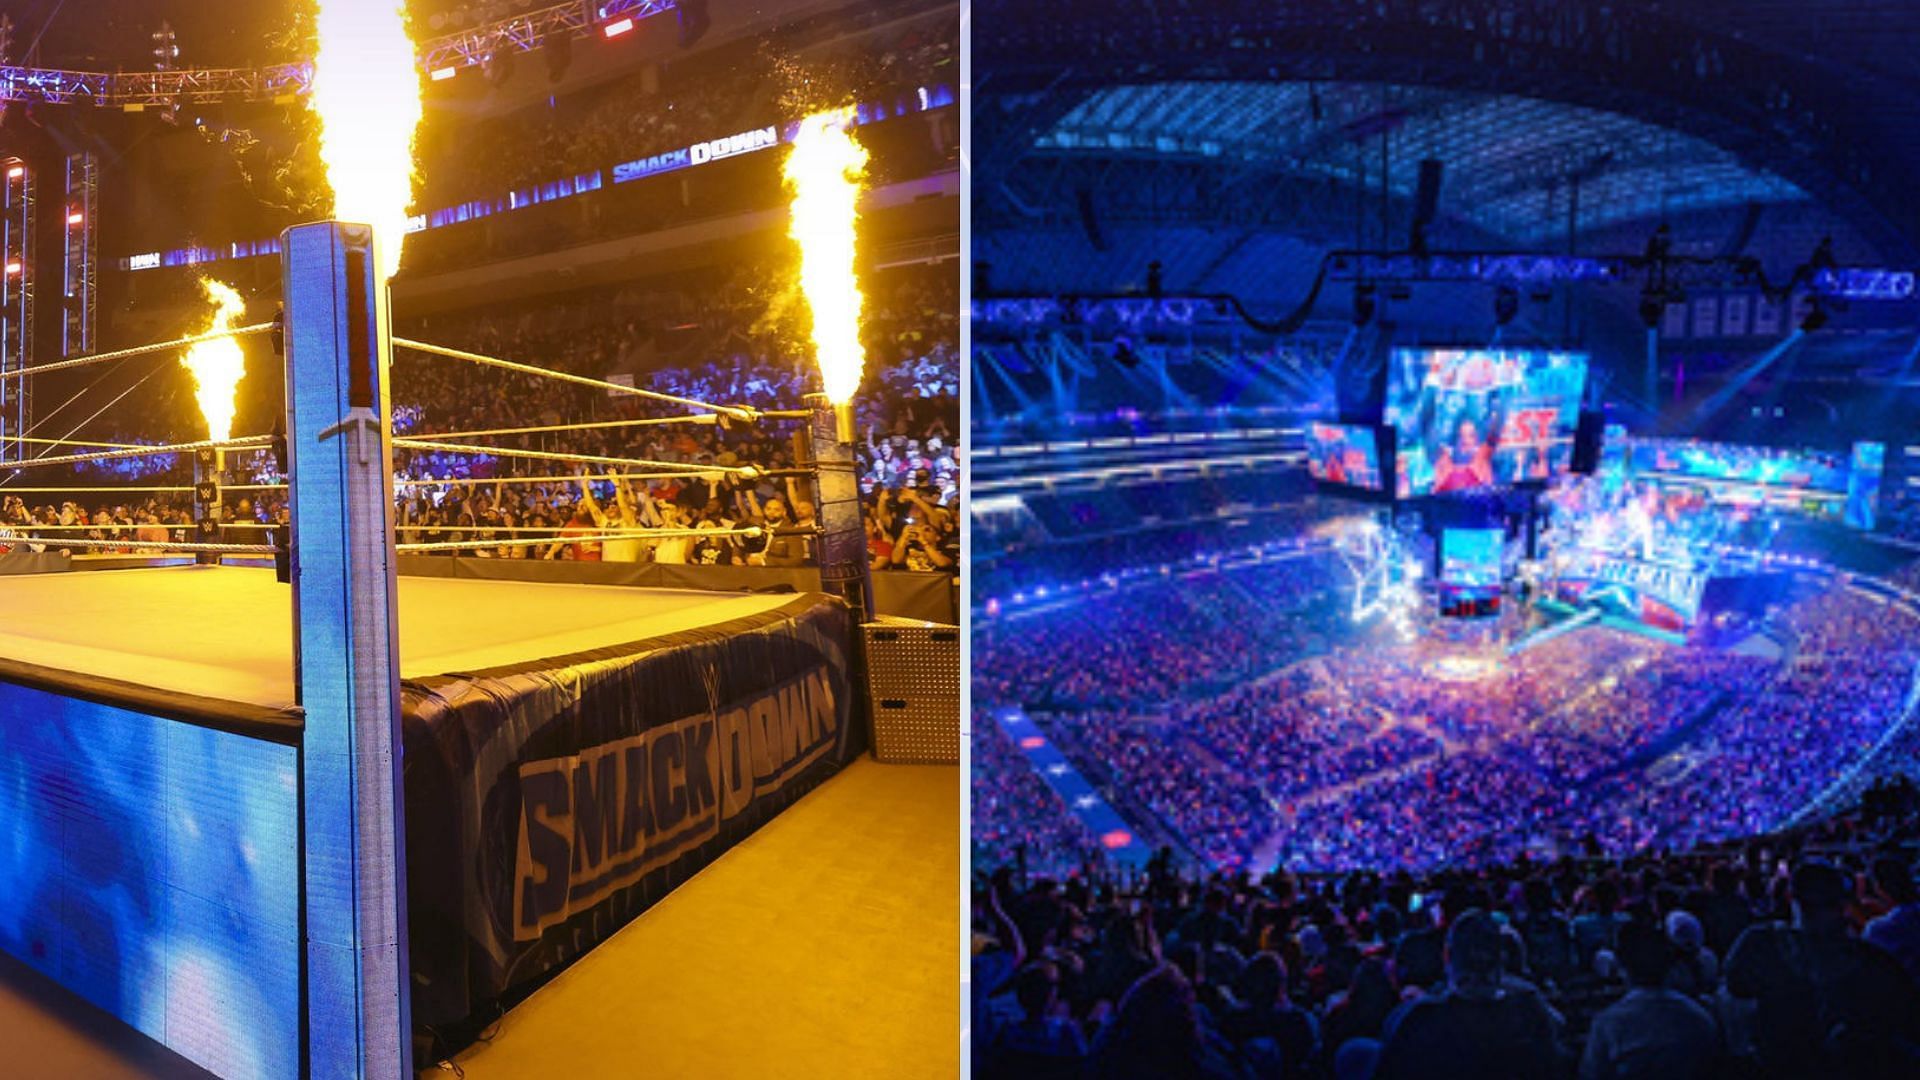 WWE SmackDown for next week was taped from the Delta Center in Salt Lake City, Utah